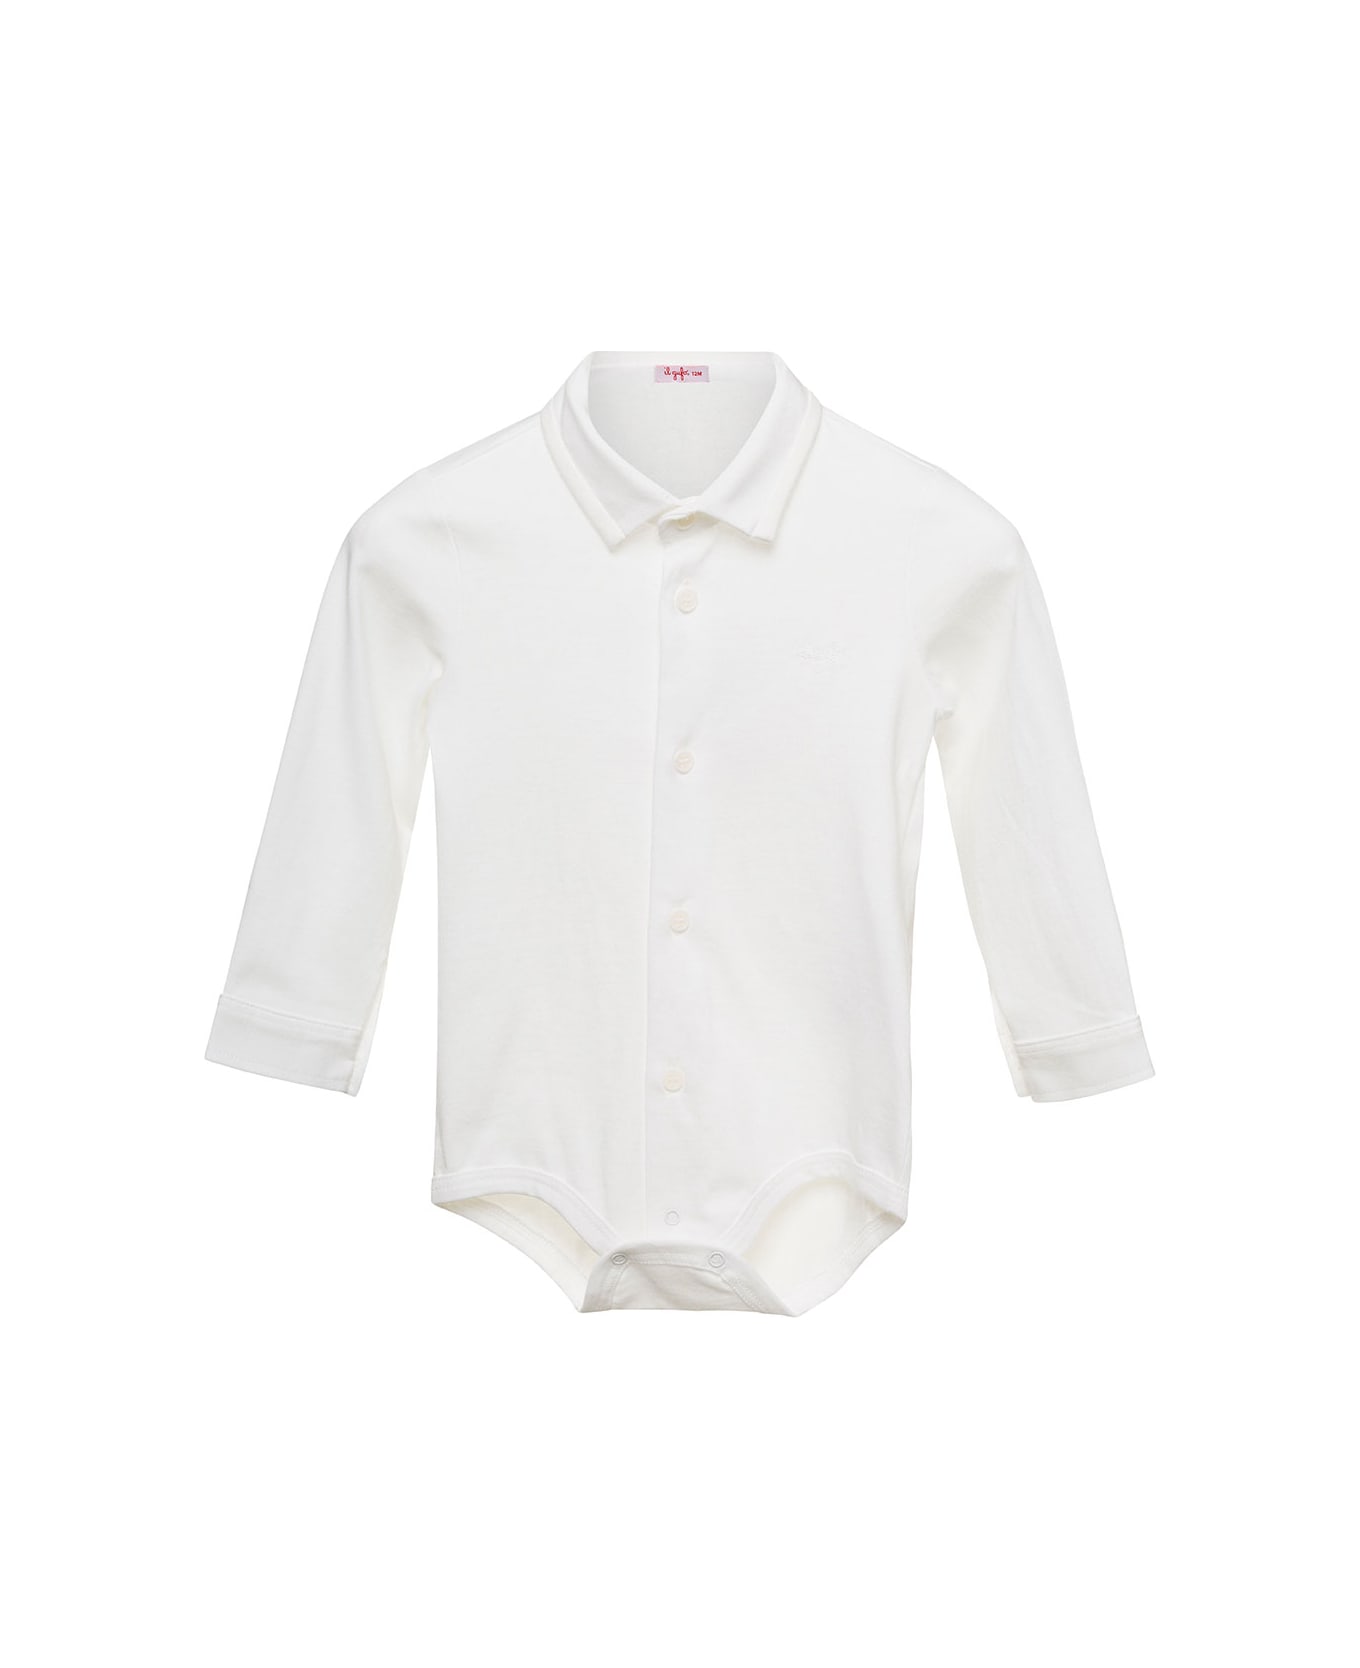 Il Gufo White Romper With Collar And Buttons In Cotton Baby - White